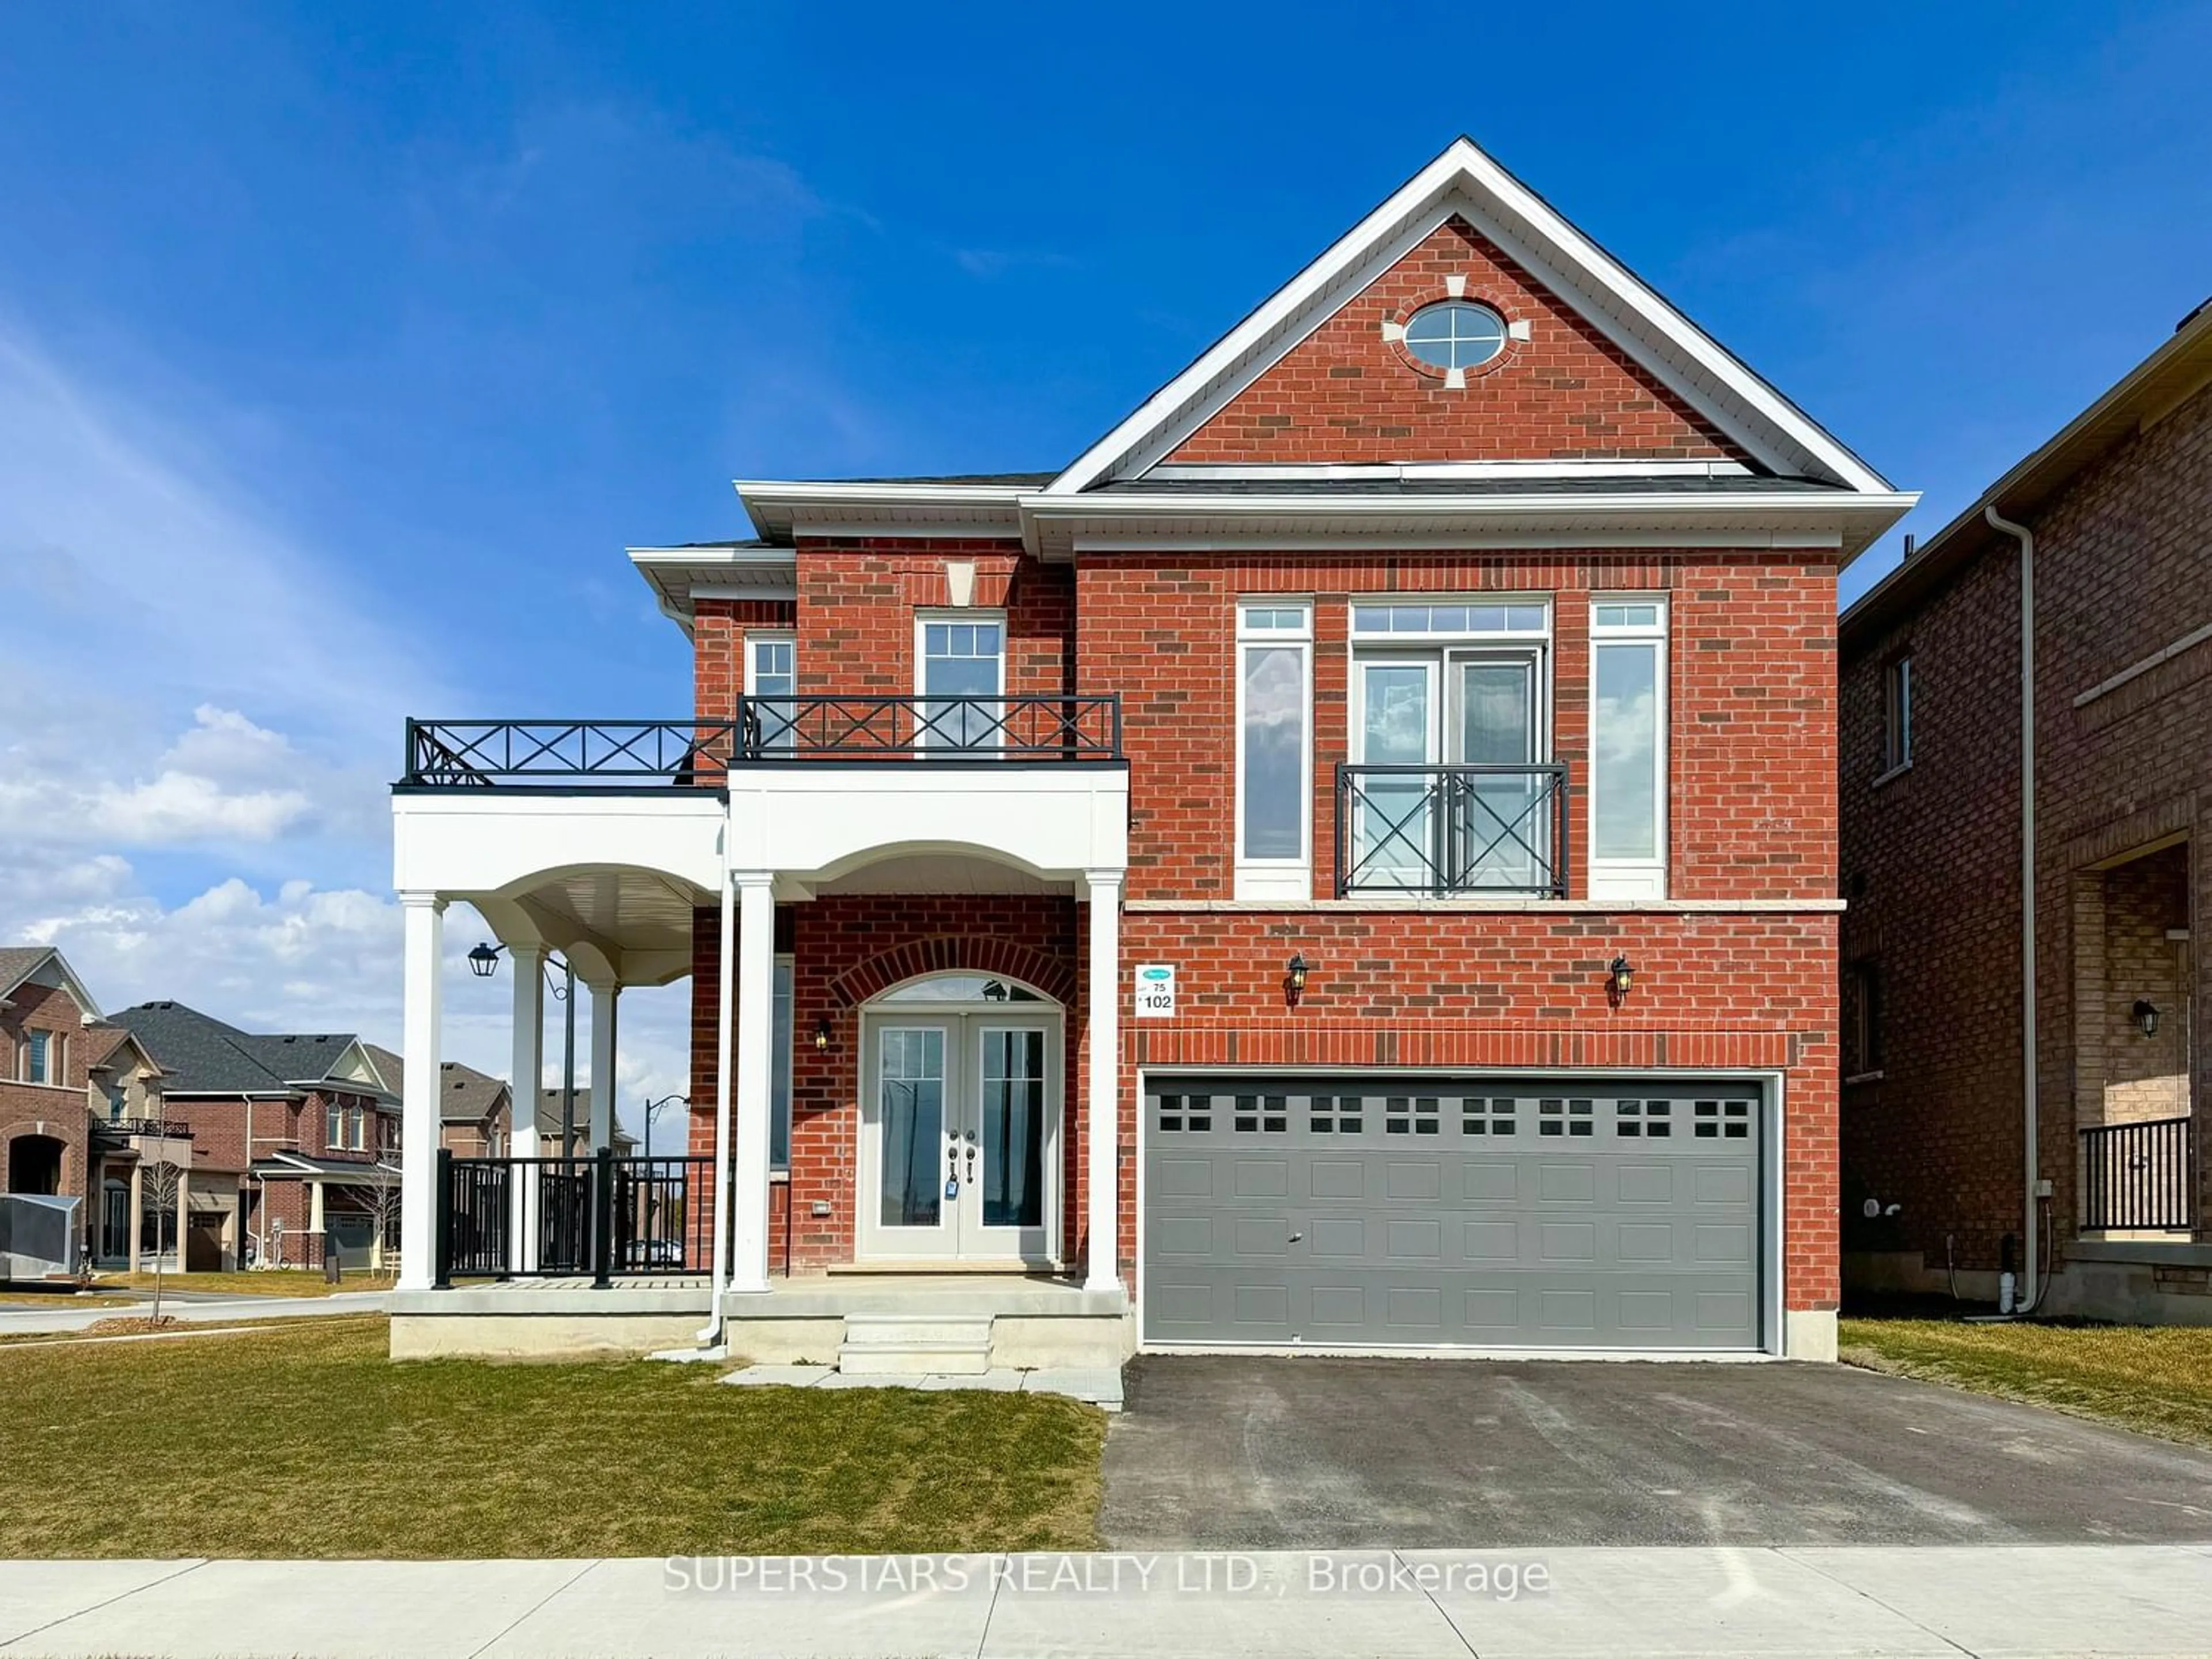 Home with brick exterior material for 102 Mac Campbell Way, Bradford West Gwillimbury Ontario L3Z 4M6